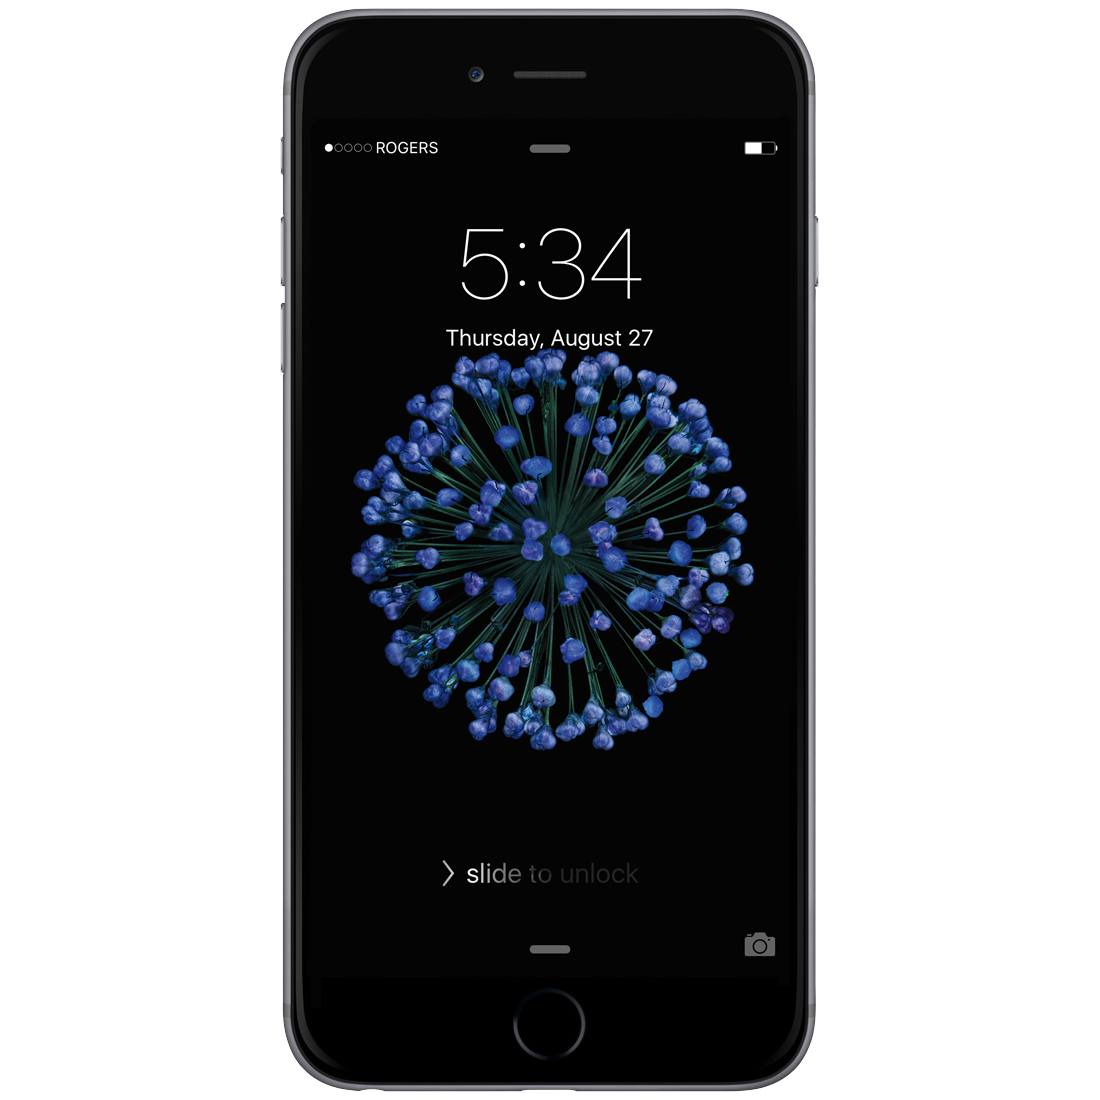 IPhone 6s to Feature Motion Wallpapers Similar to the Apple Watch